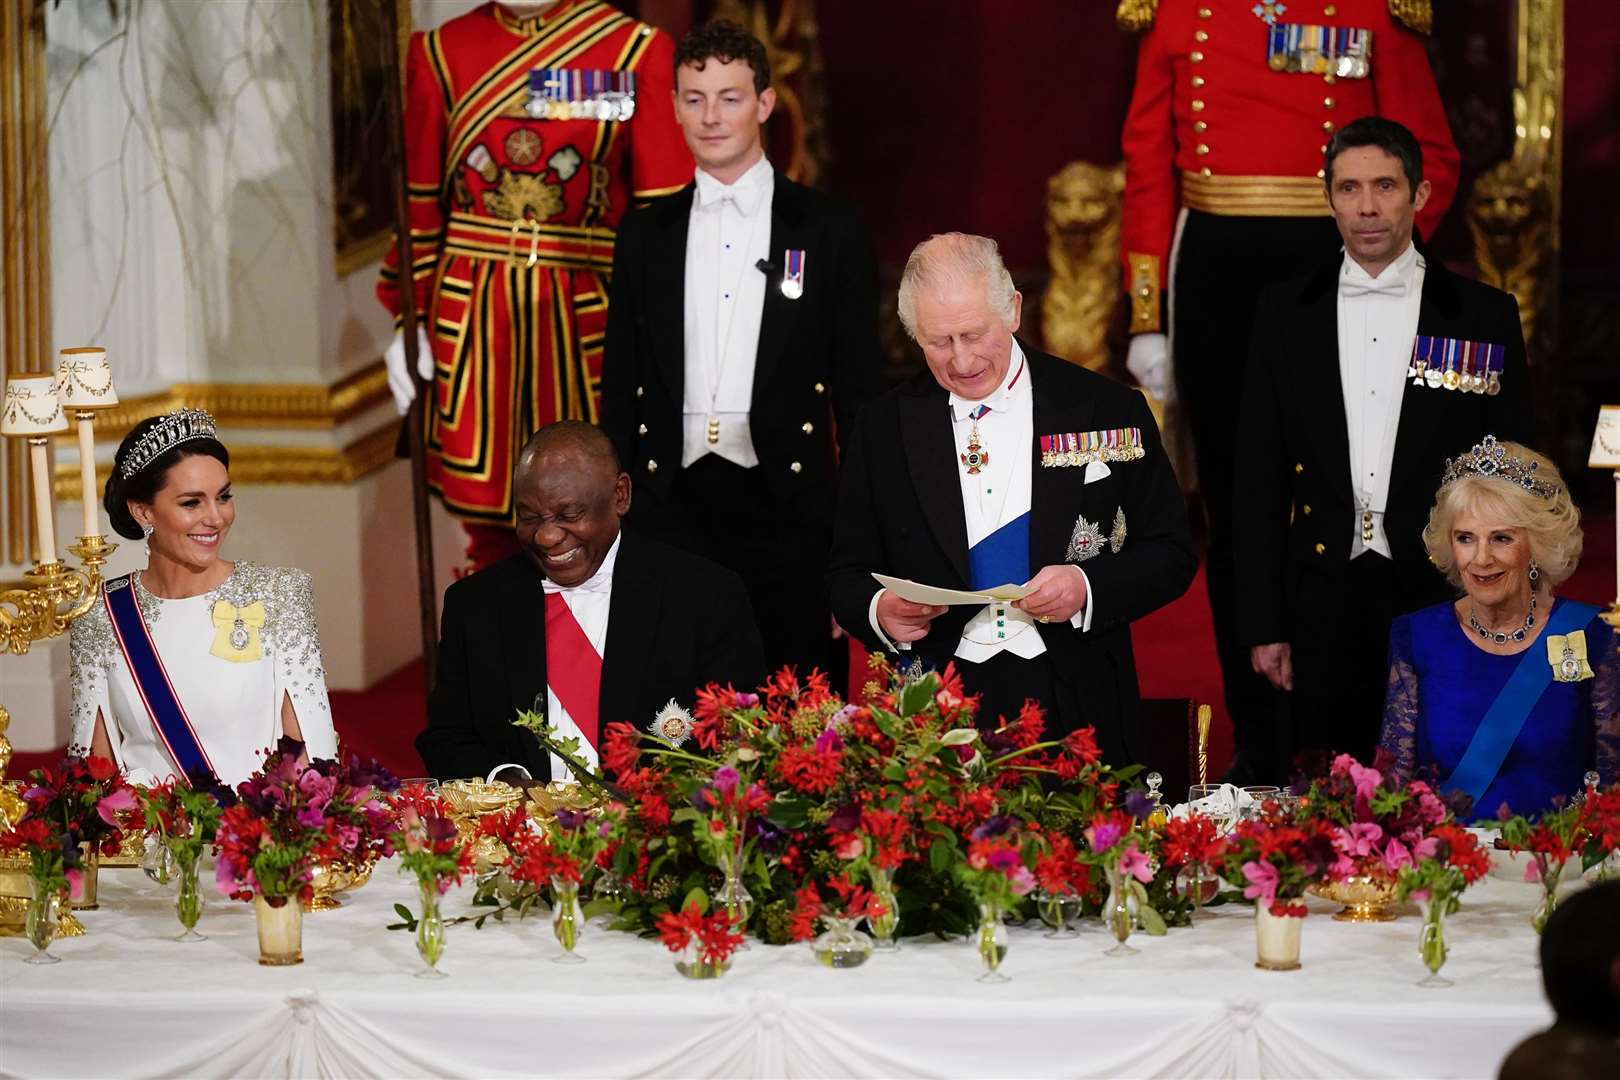 The royal family during the state banquet for the South African state visit to the UK (Aaron Chown/PA)